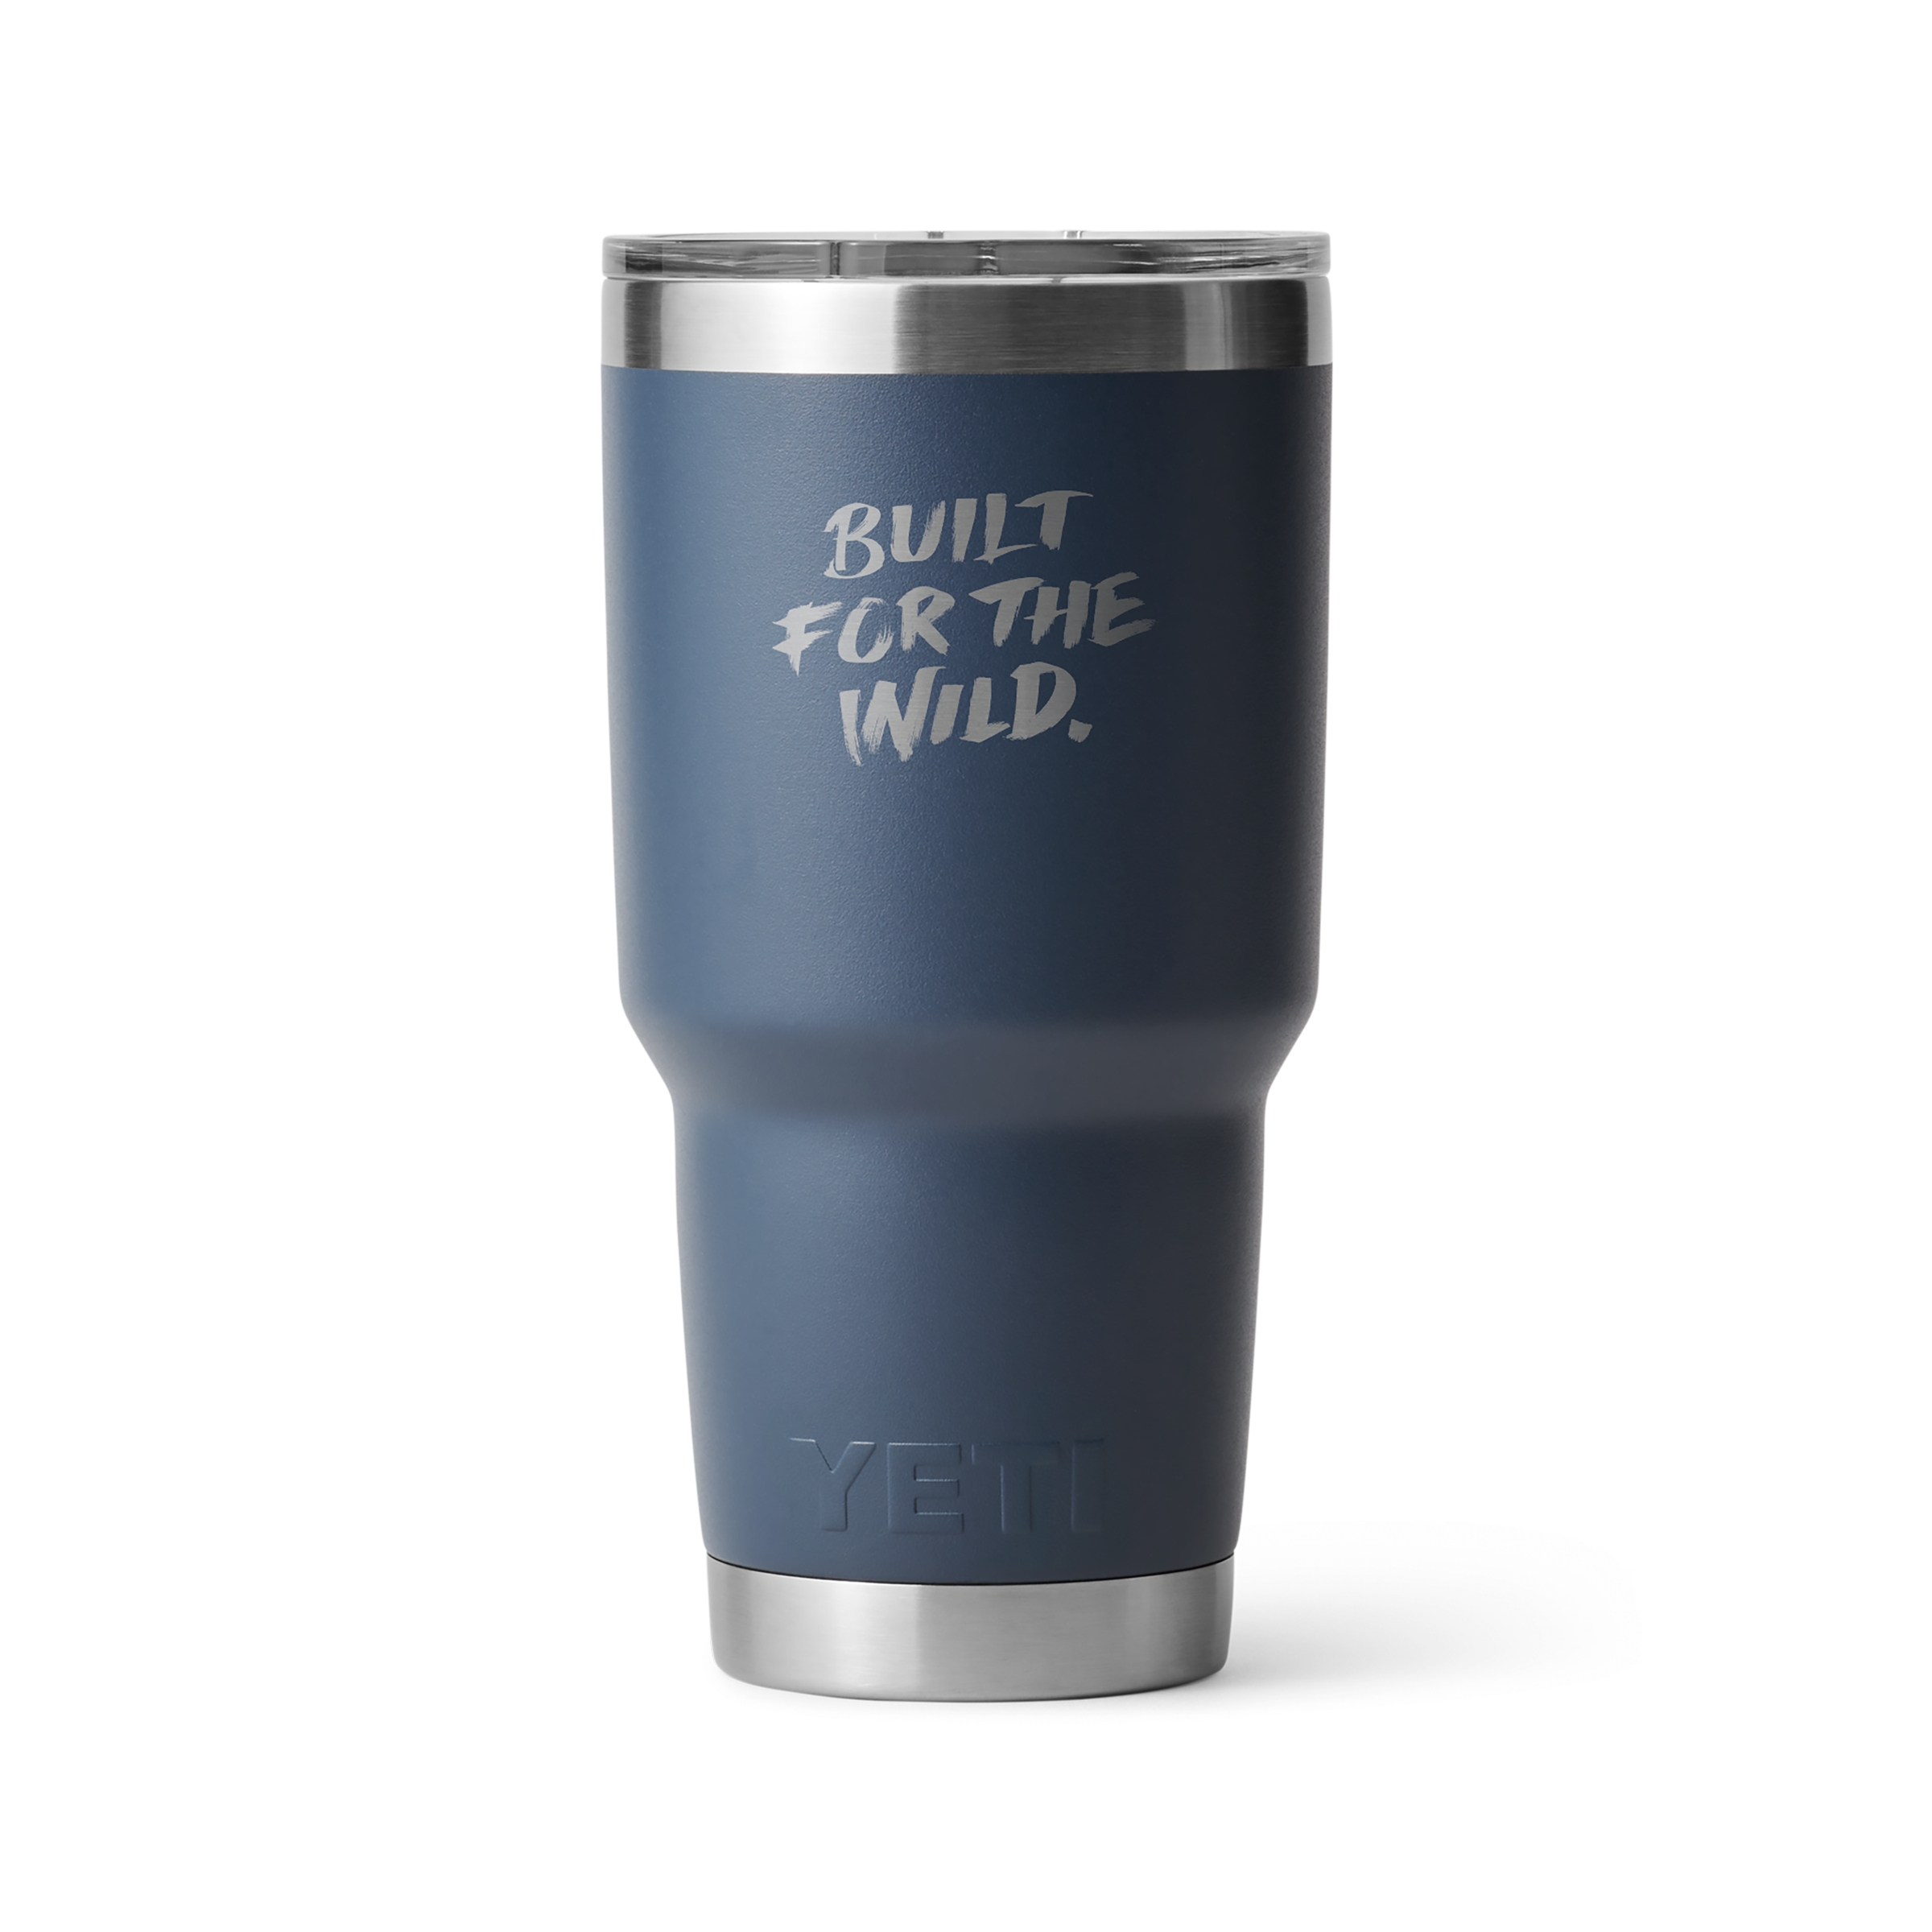 https://yeti-web.imgix.net/5ba7915c58449a28/original/PLP2_Studio_Product_Images_Carousel_1_0_Category_Large_Custom_By_Design_Navy_30oz_Tumbler_Built_For_The_Wild_Classic_Image.png?auto=format